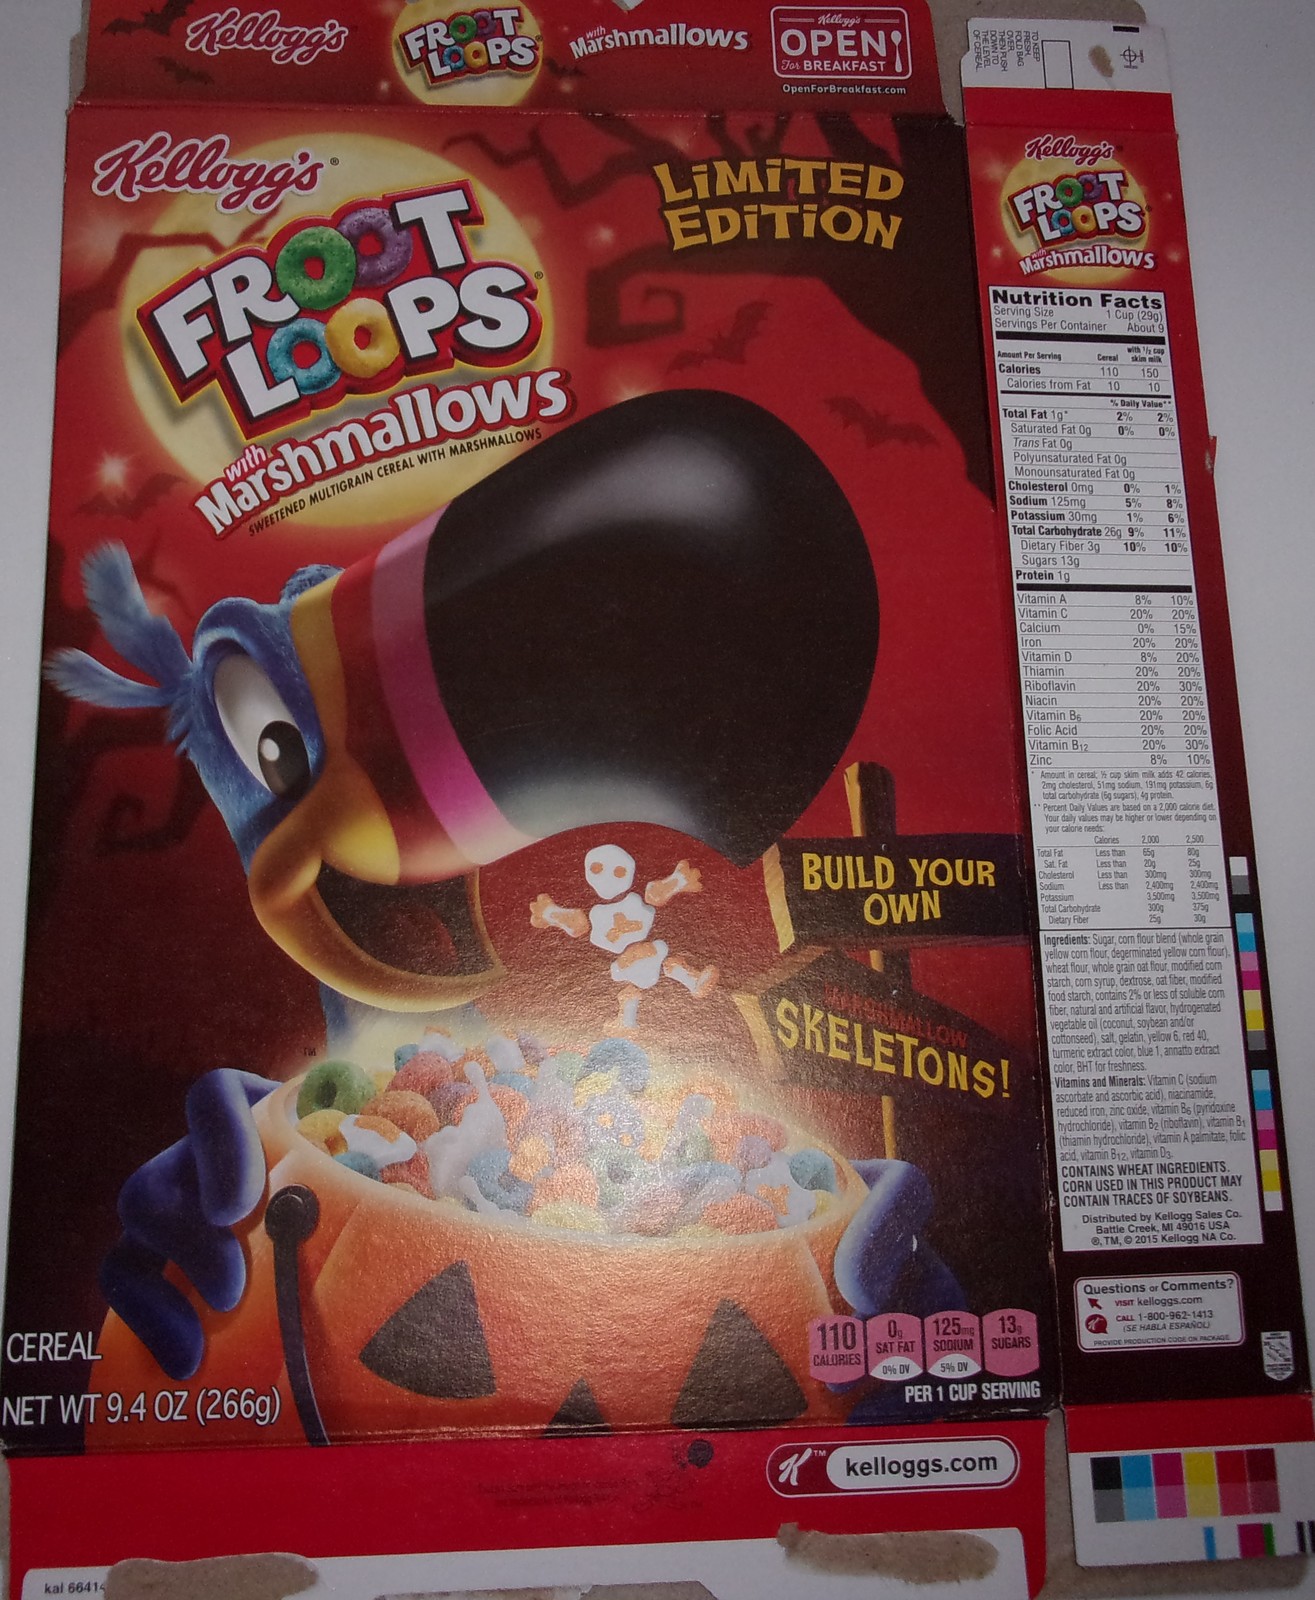 Kellogg’s Limited Edition Halloween Froot Loops Skeletons Cereal Empty Box 2016 - $3.99